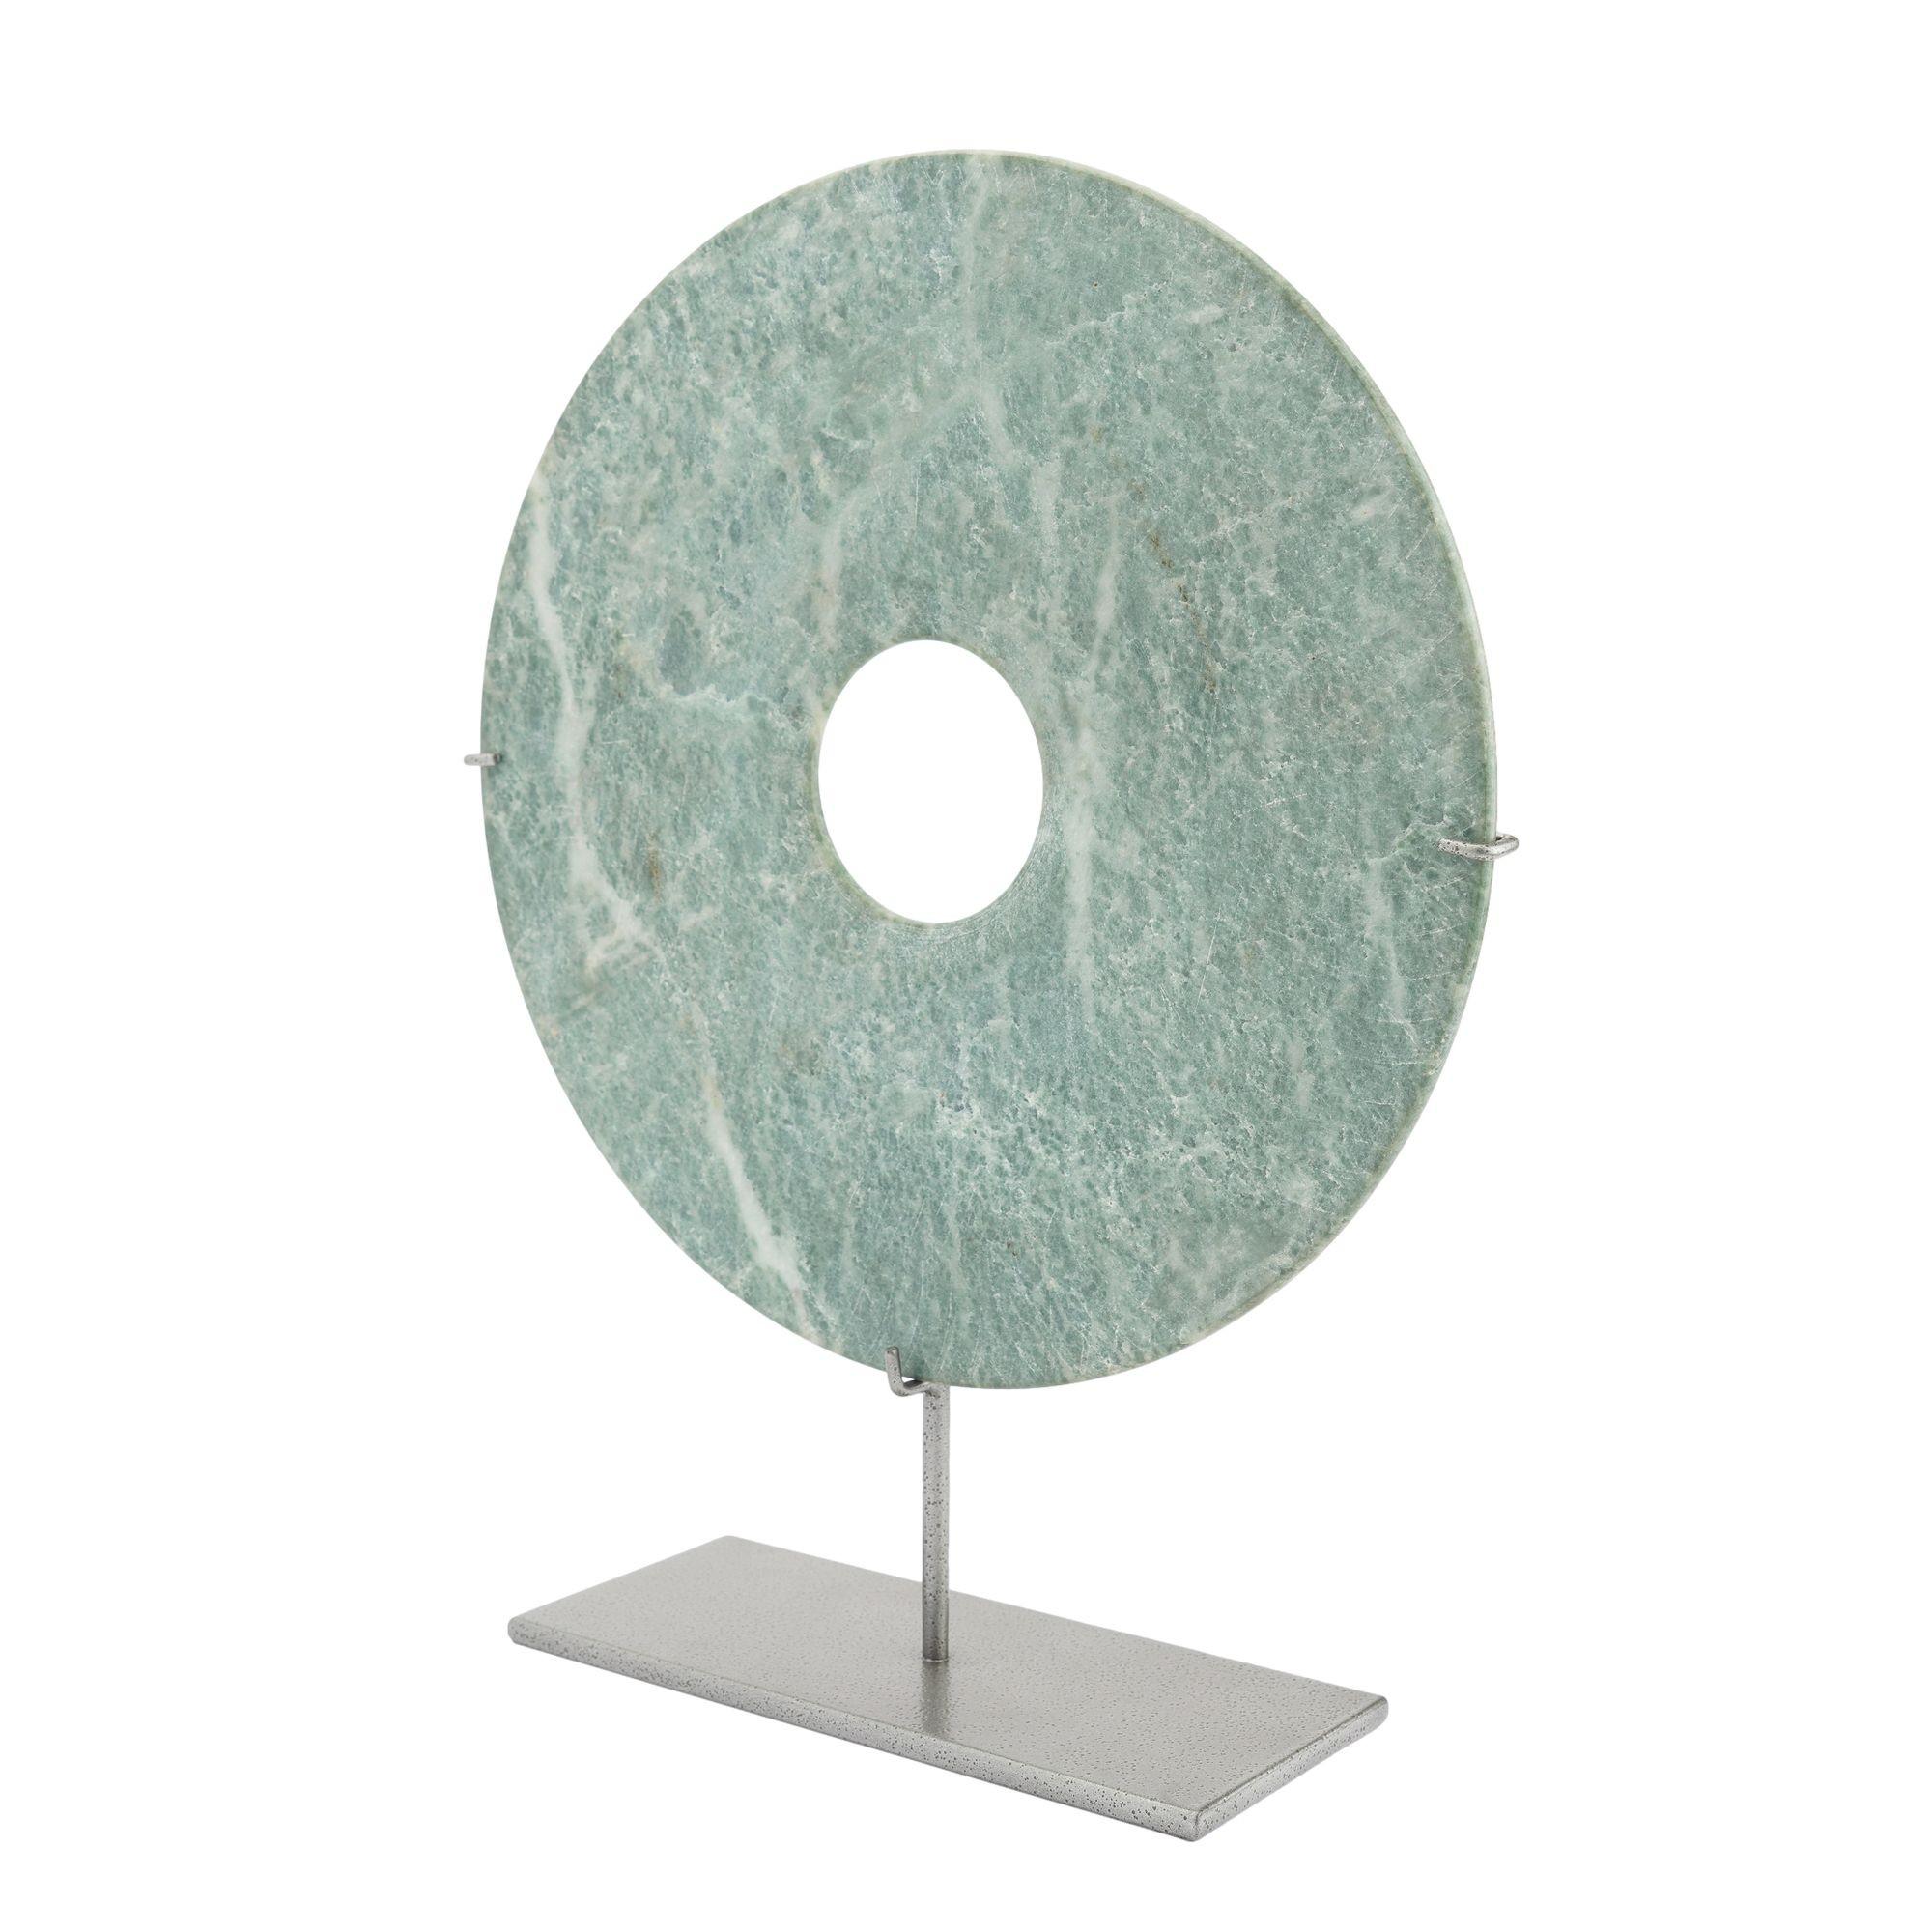 Chinese carved jade bi disc on a custom powder coated iron stand. The bi is an honorific symbol of moral quality as well as a designation of social status and was used ceremonially dedicated to persons of rank.